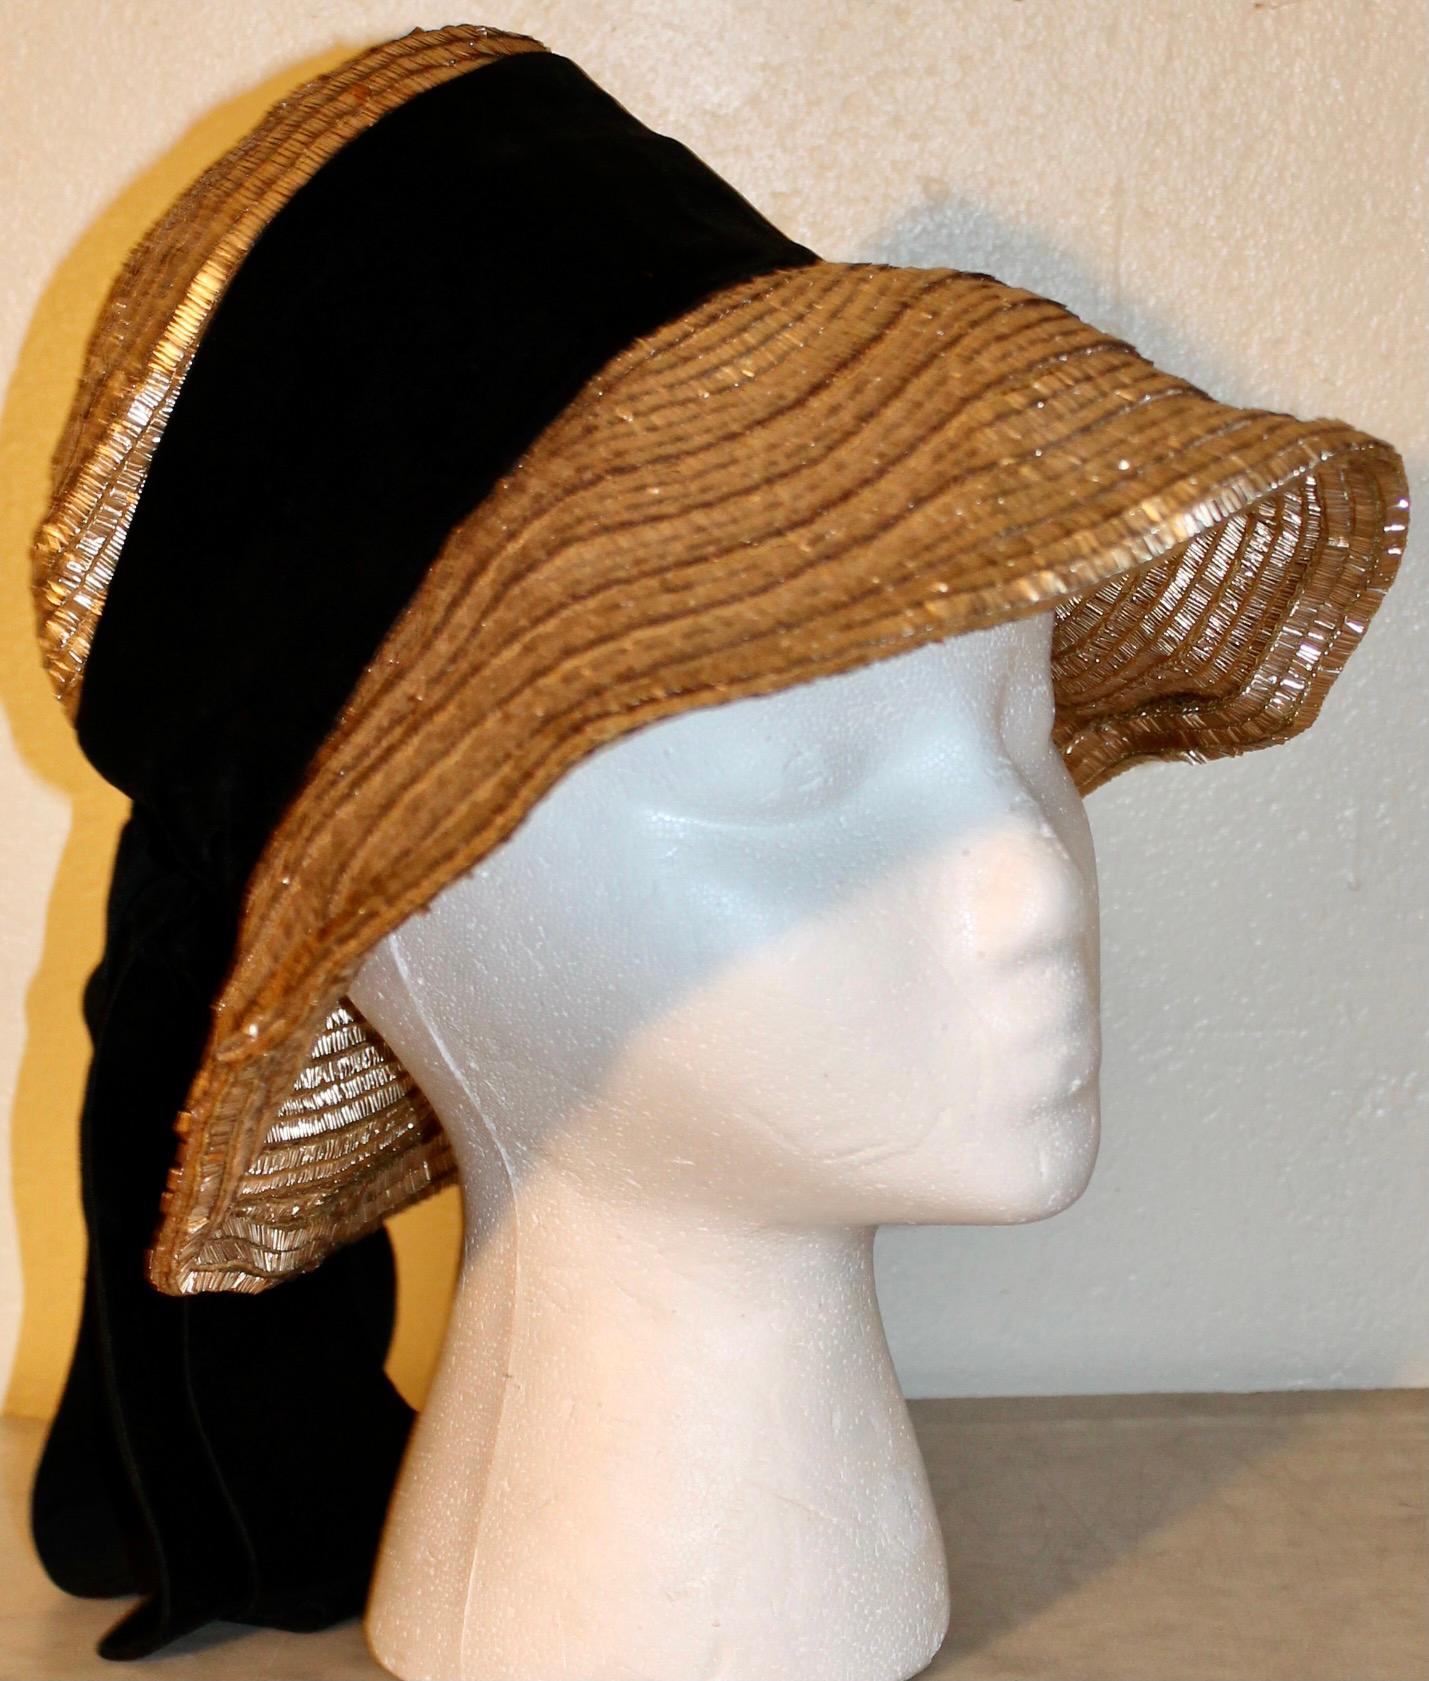 Offering an original Gerard d'Albouy (1912-1985) woven brass hat with a Velvet Ribbon attached.  The Paris Milliner, during the German Occupation (active 1938-1964) was noted for his exciting and original uses of unusual materials: such as recycled